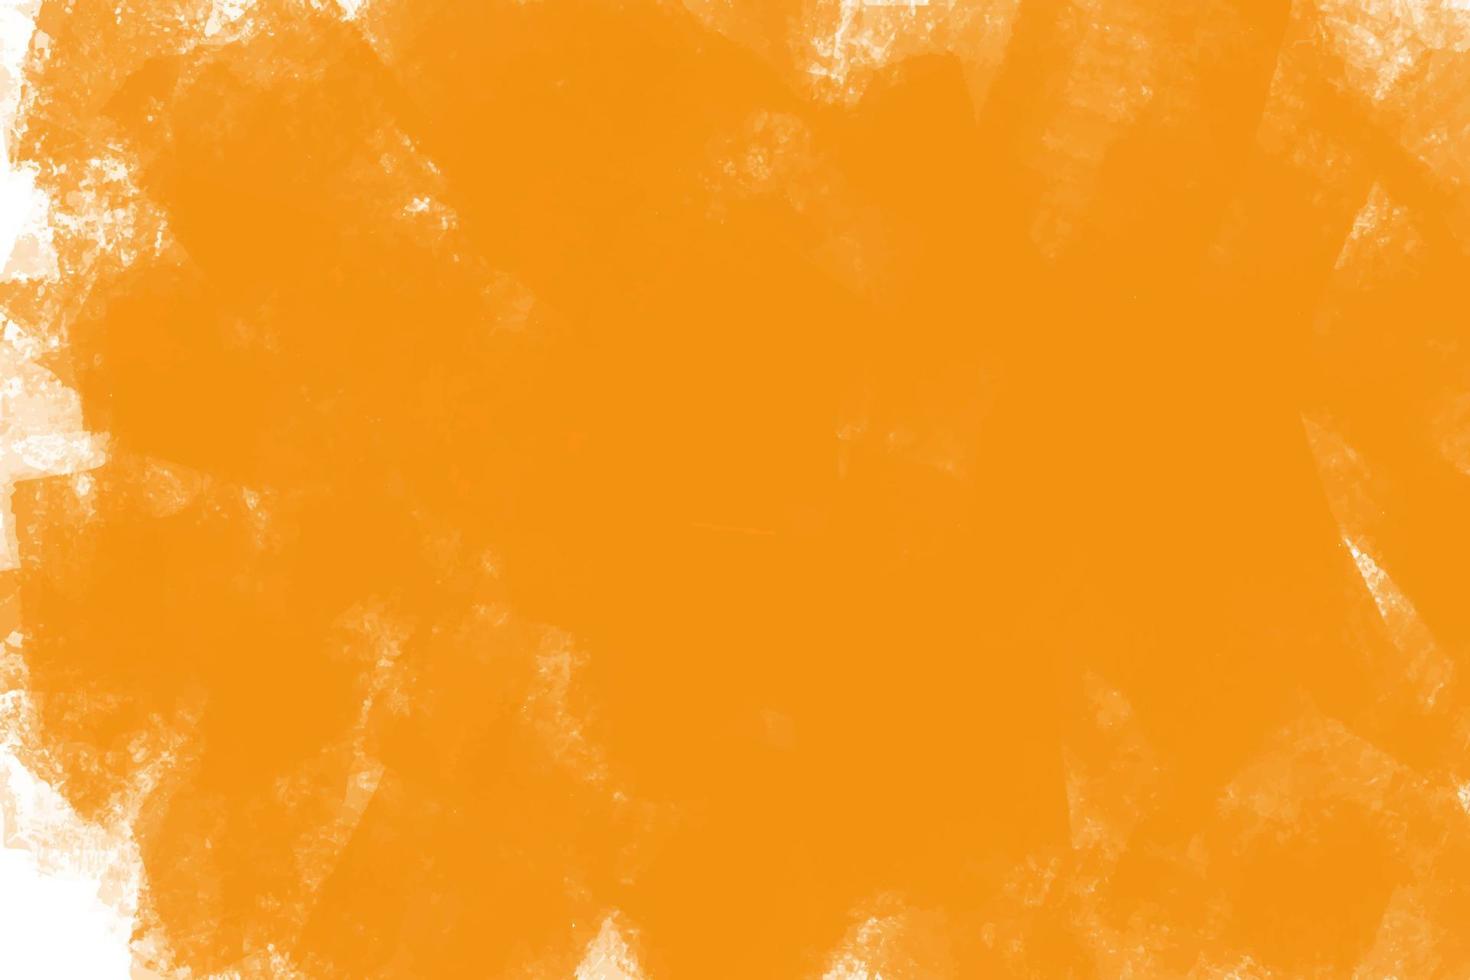 Orange blossom, background with strokes on canvas, vector